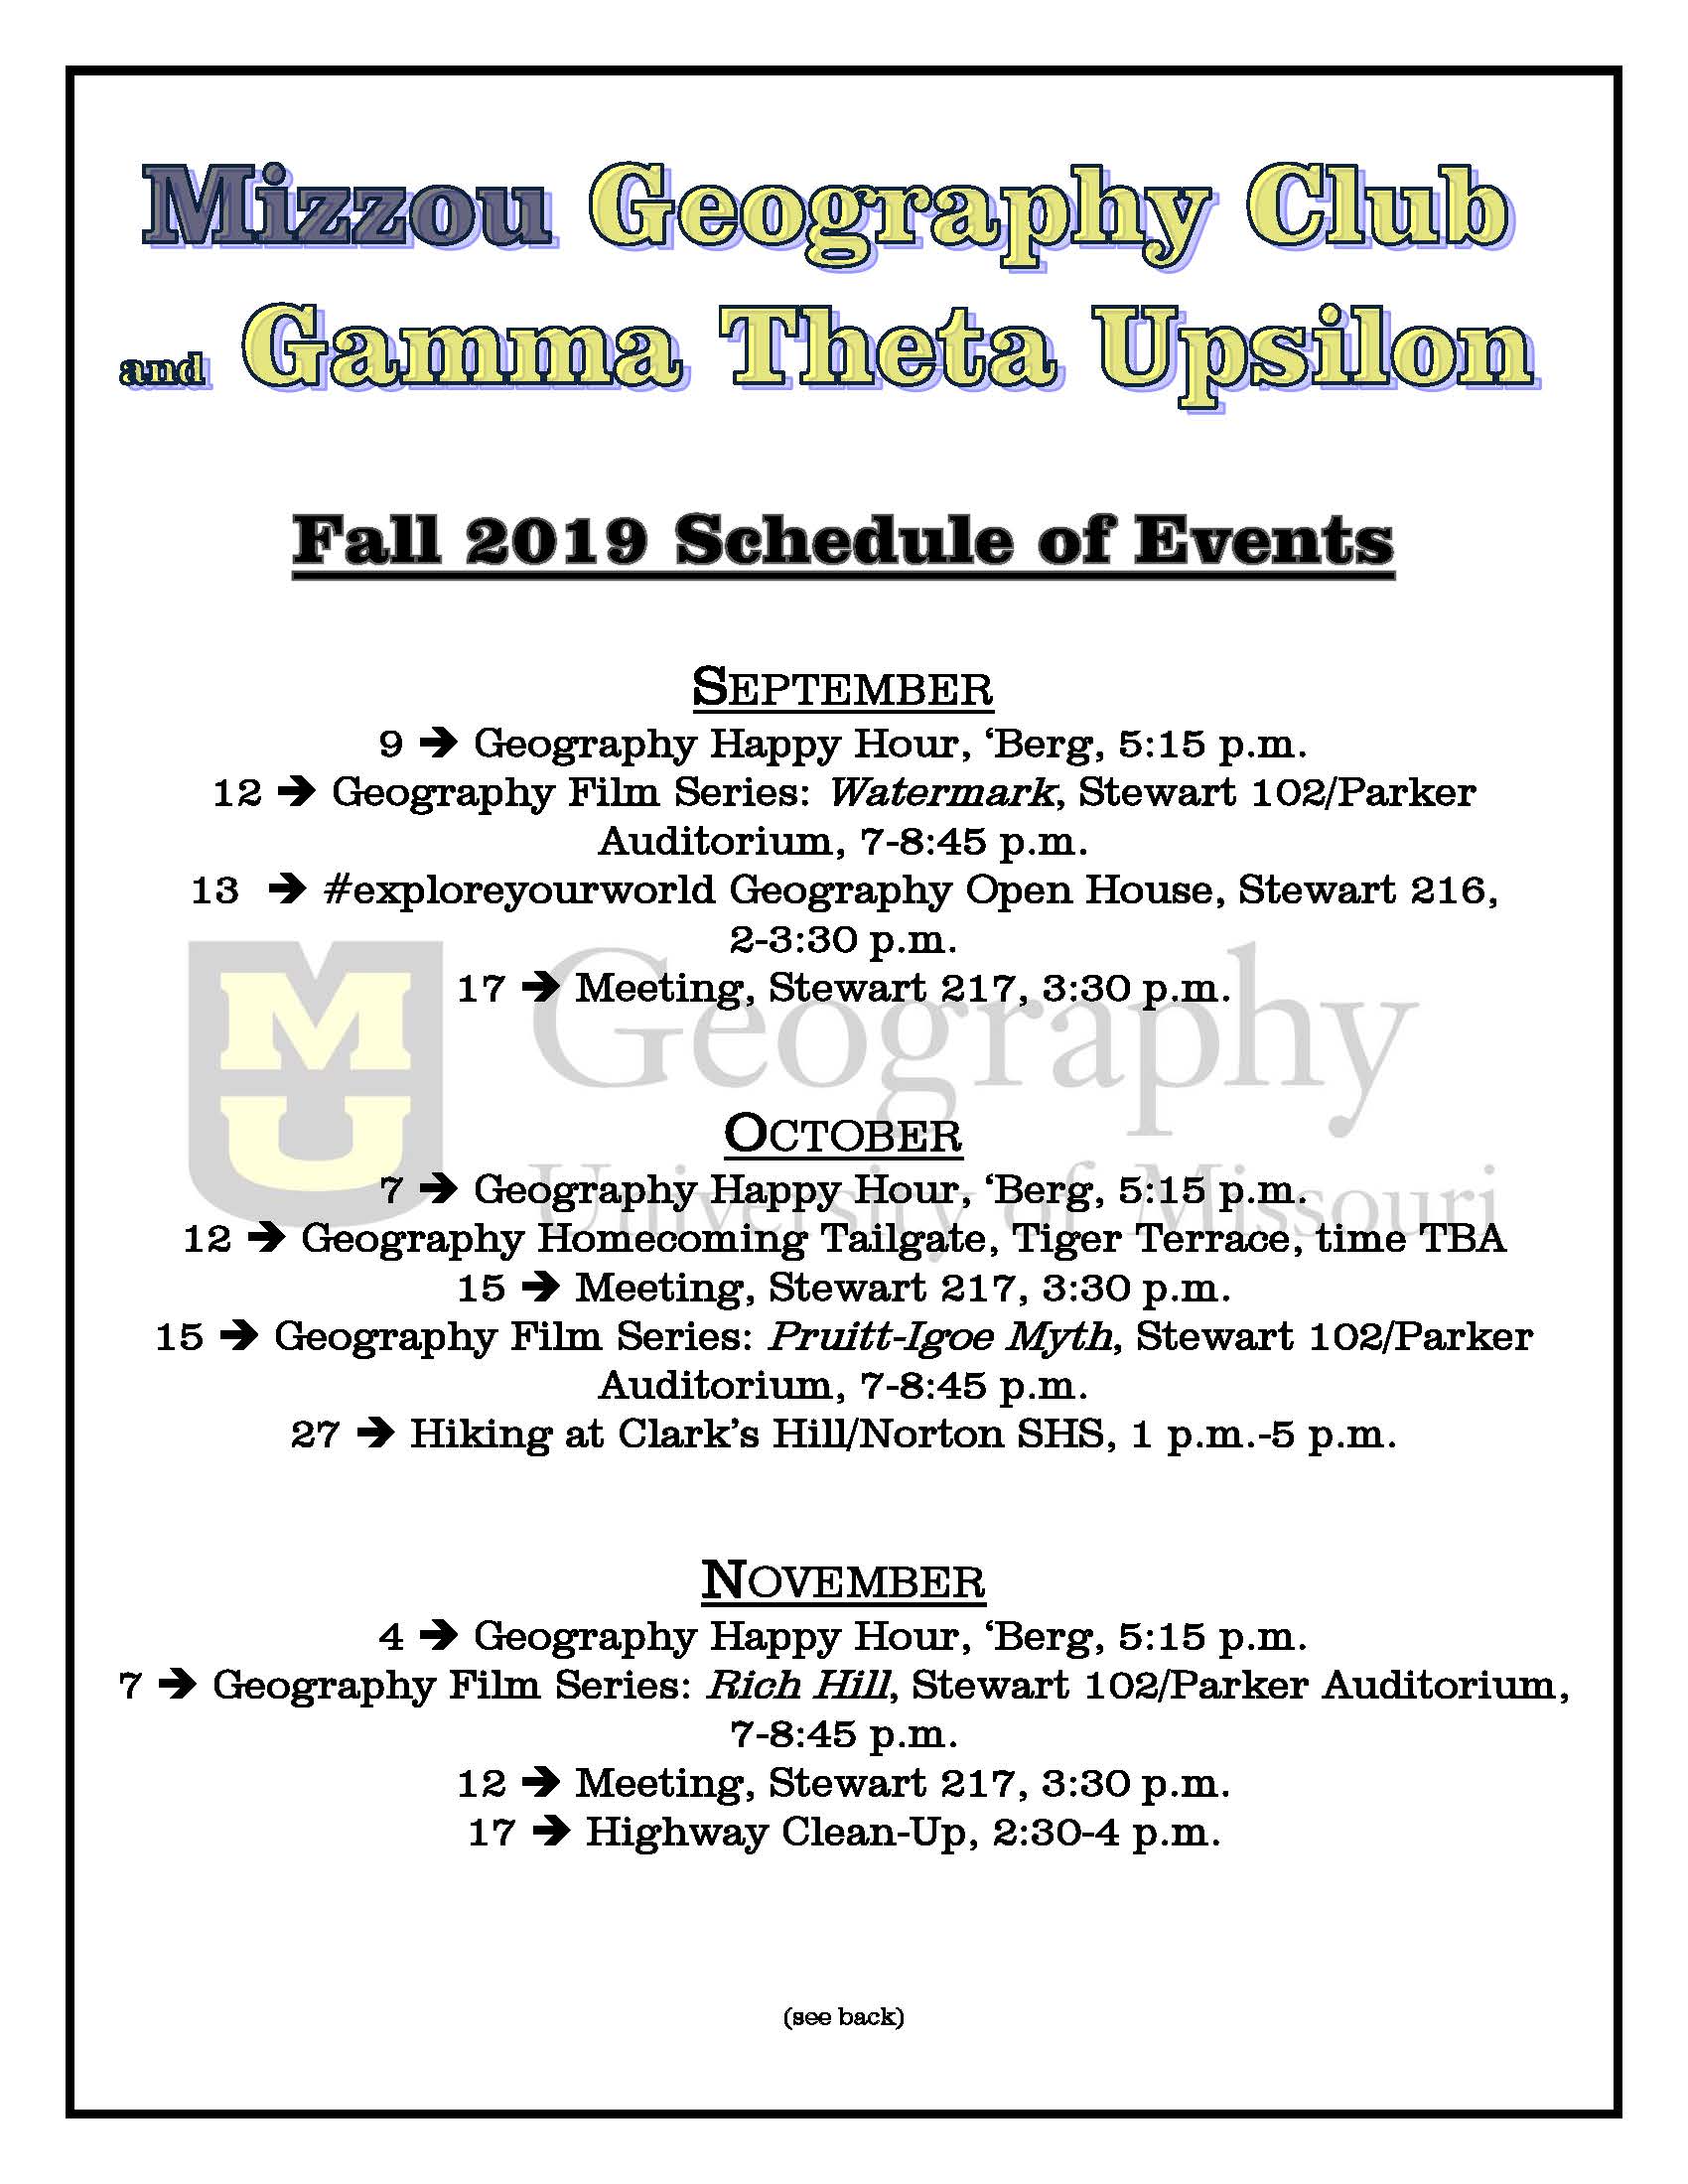 Fall 2019 Schedule of Events